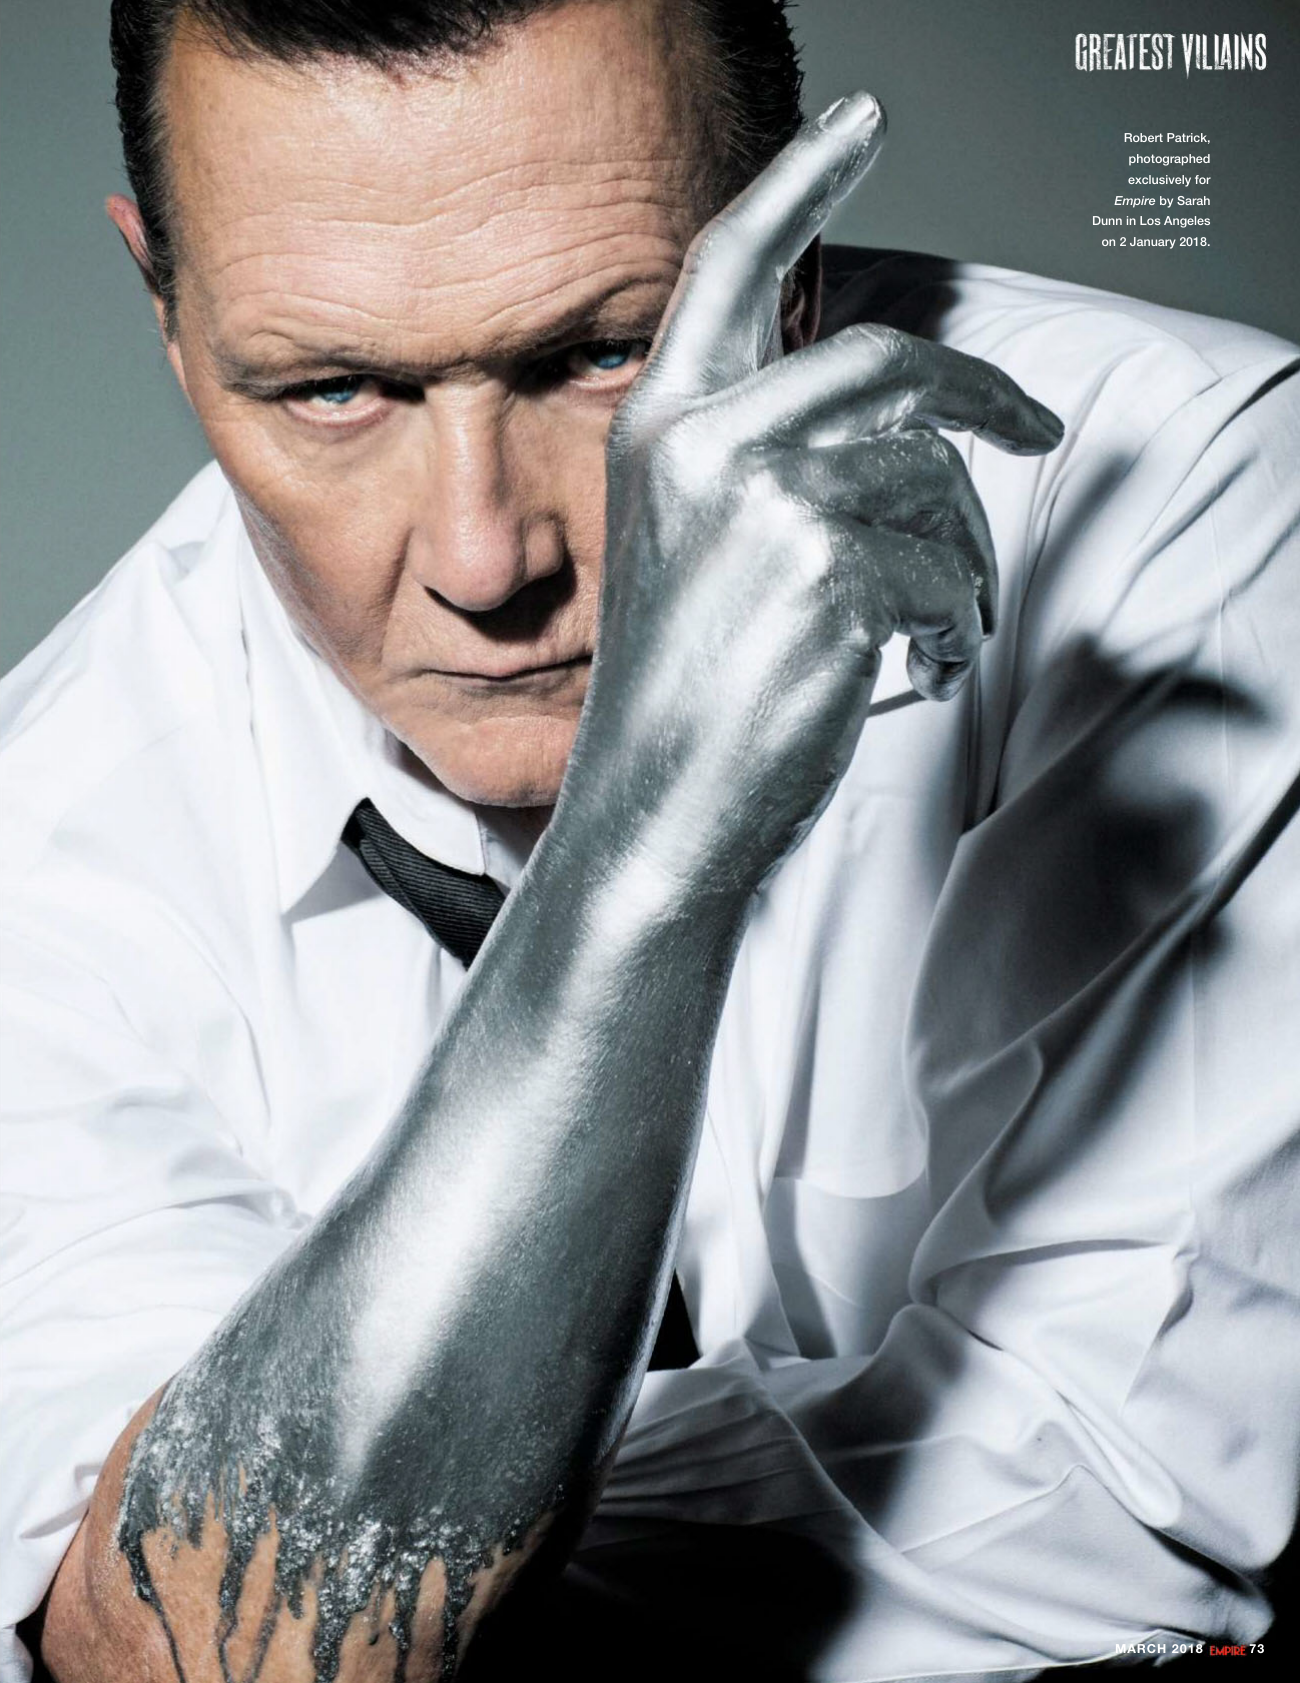 Robert Patrick for EMPIRE Magazine's Greatest Movie Villains - Actors and actresses, Terminator 2: Judgment Day, Robert Patrick